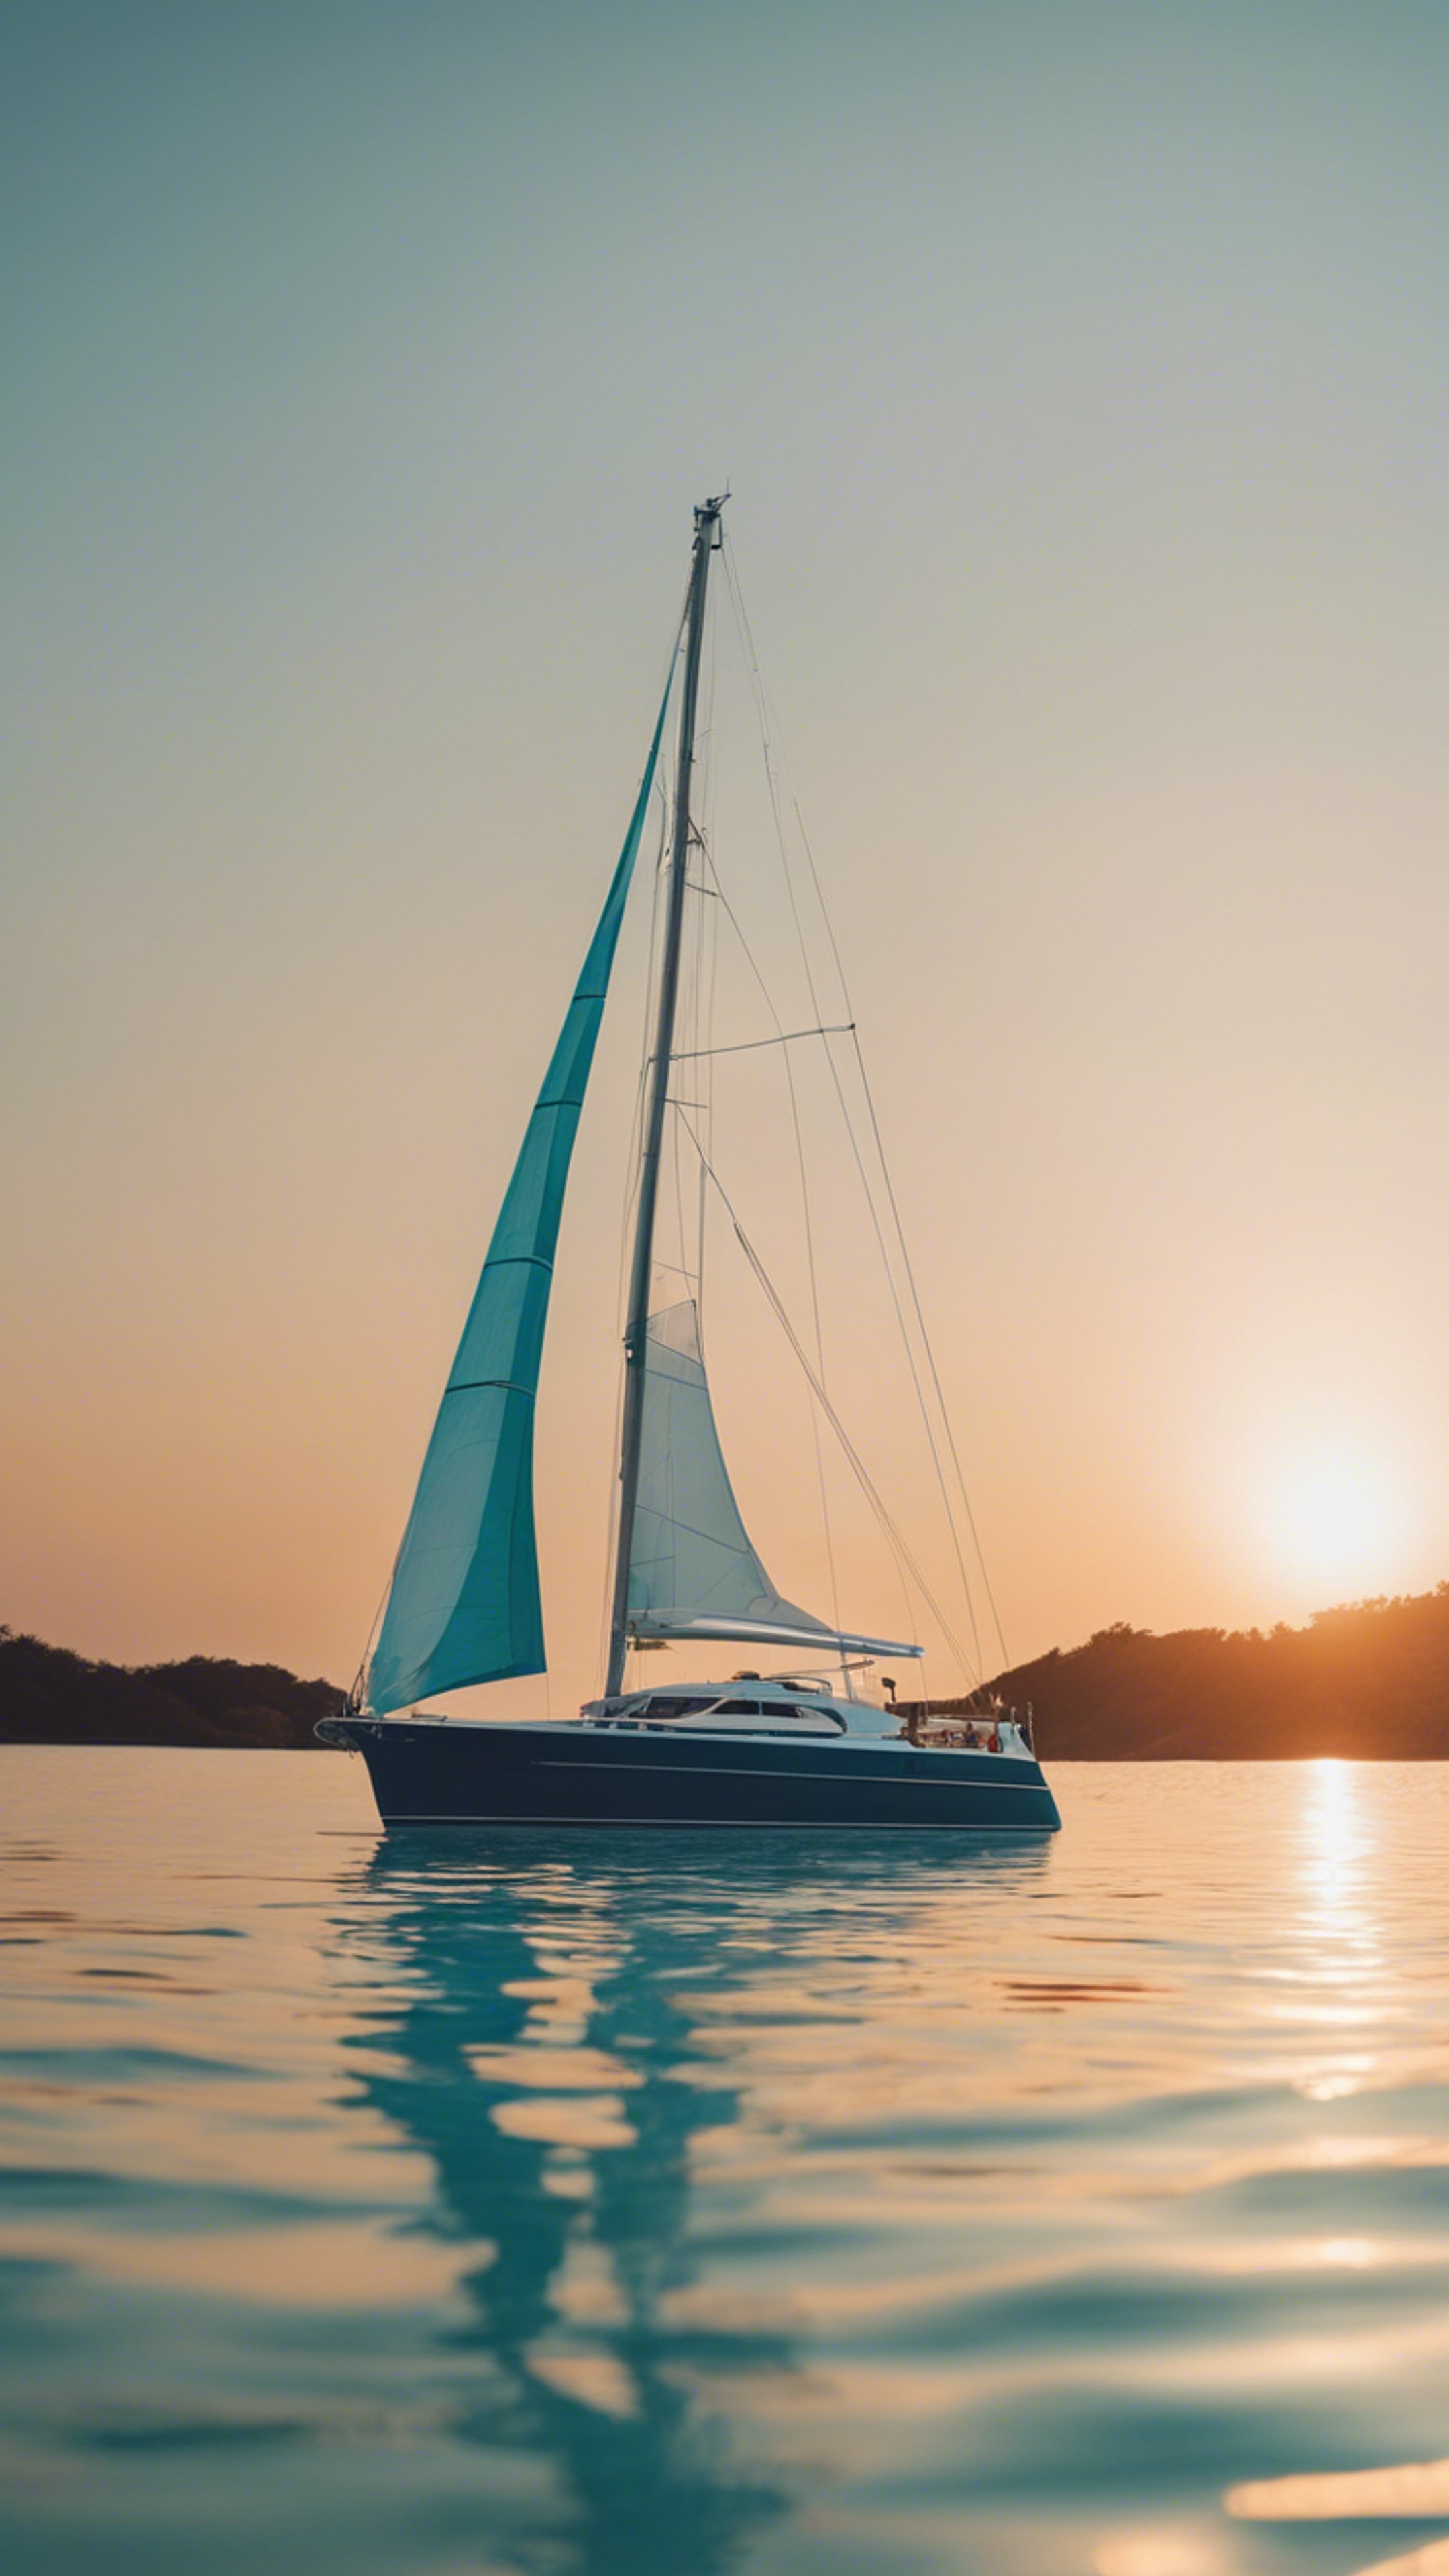 A preppy blue yacht sailing calmly on clear aquamarine waters at sunset. Tapeta[1bfcce9f38c64176b950]